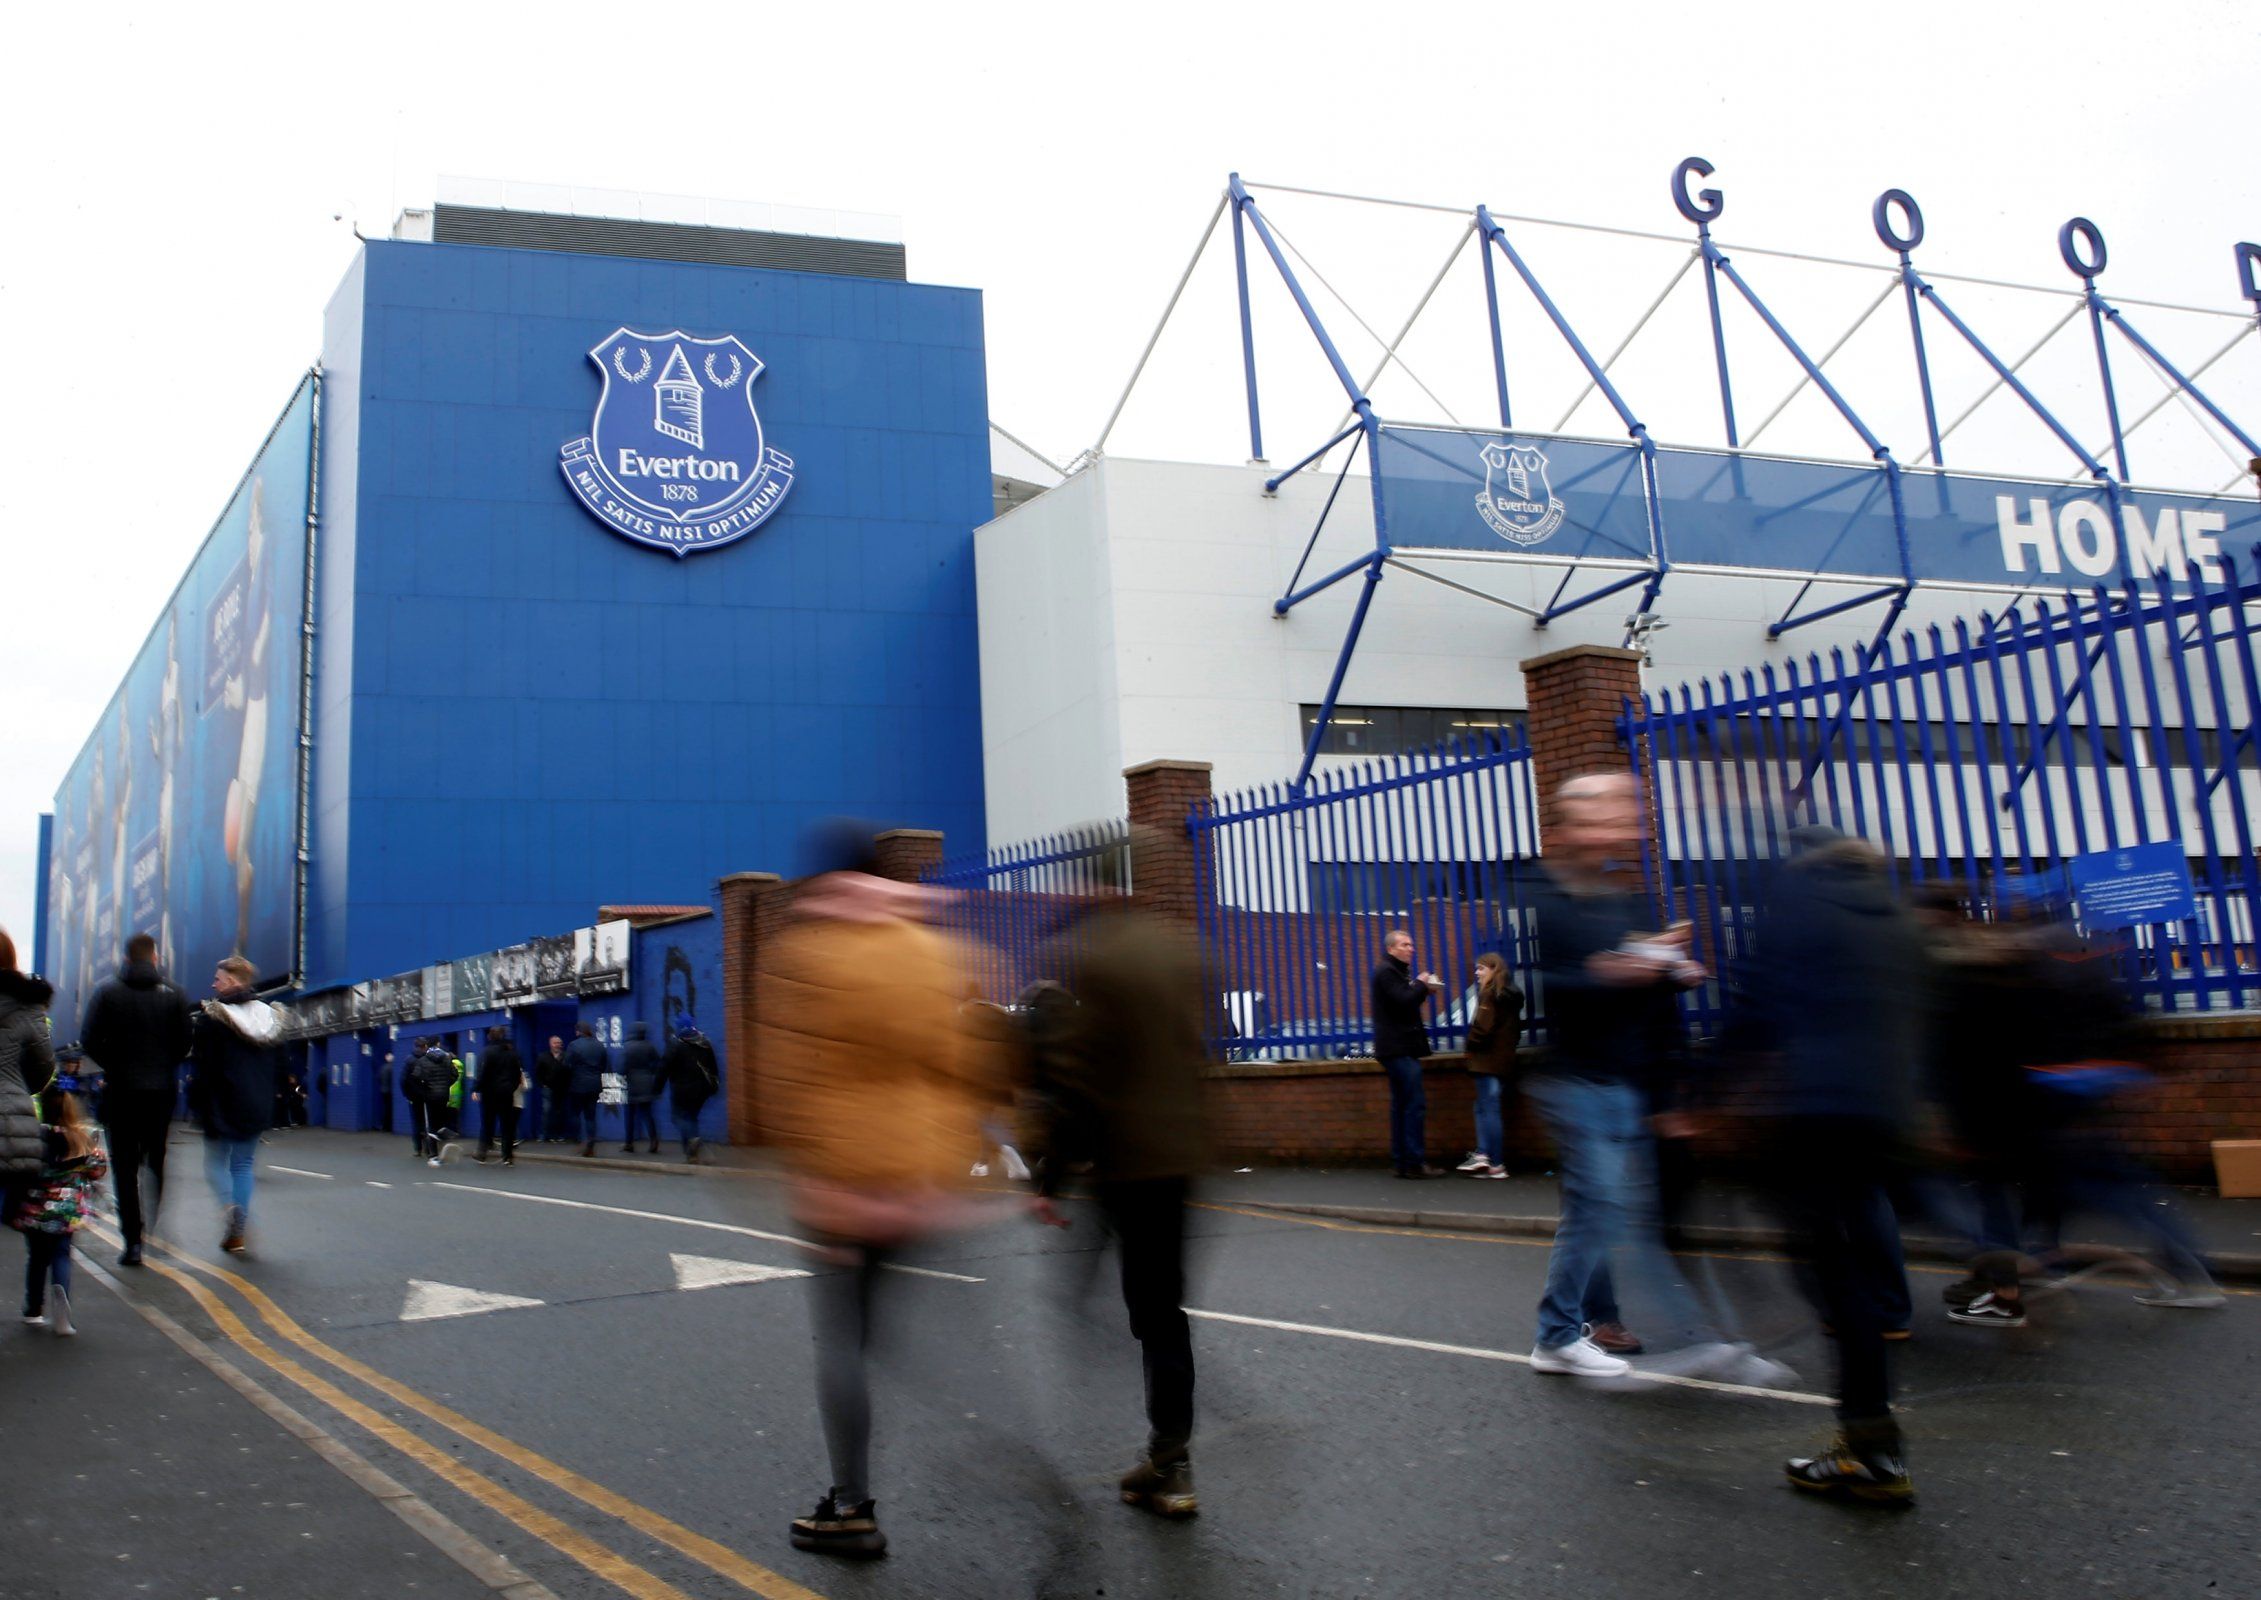 General view of Everton's Goodison Park